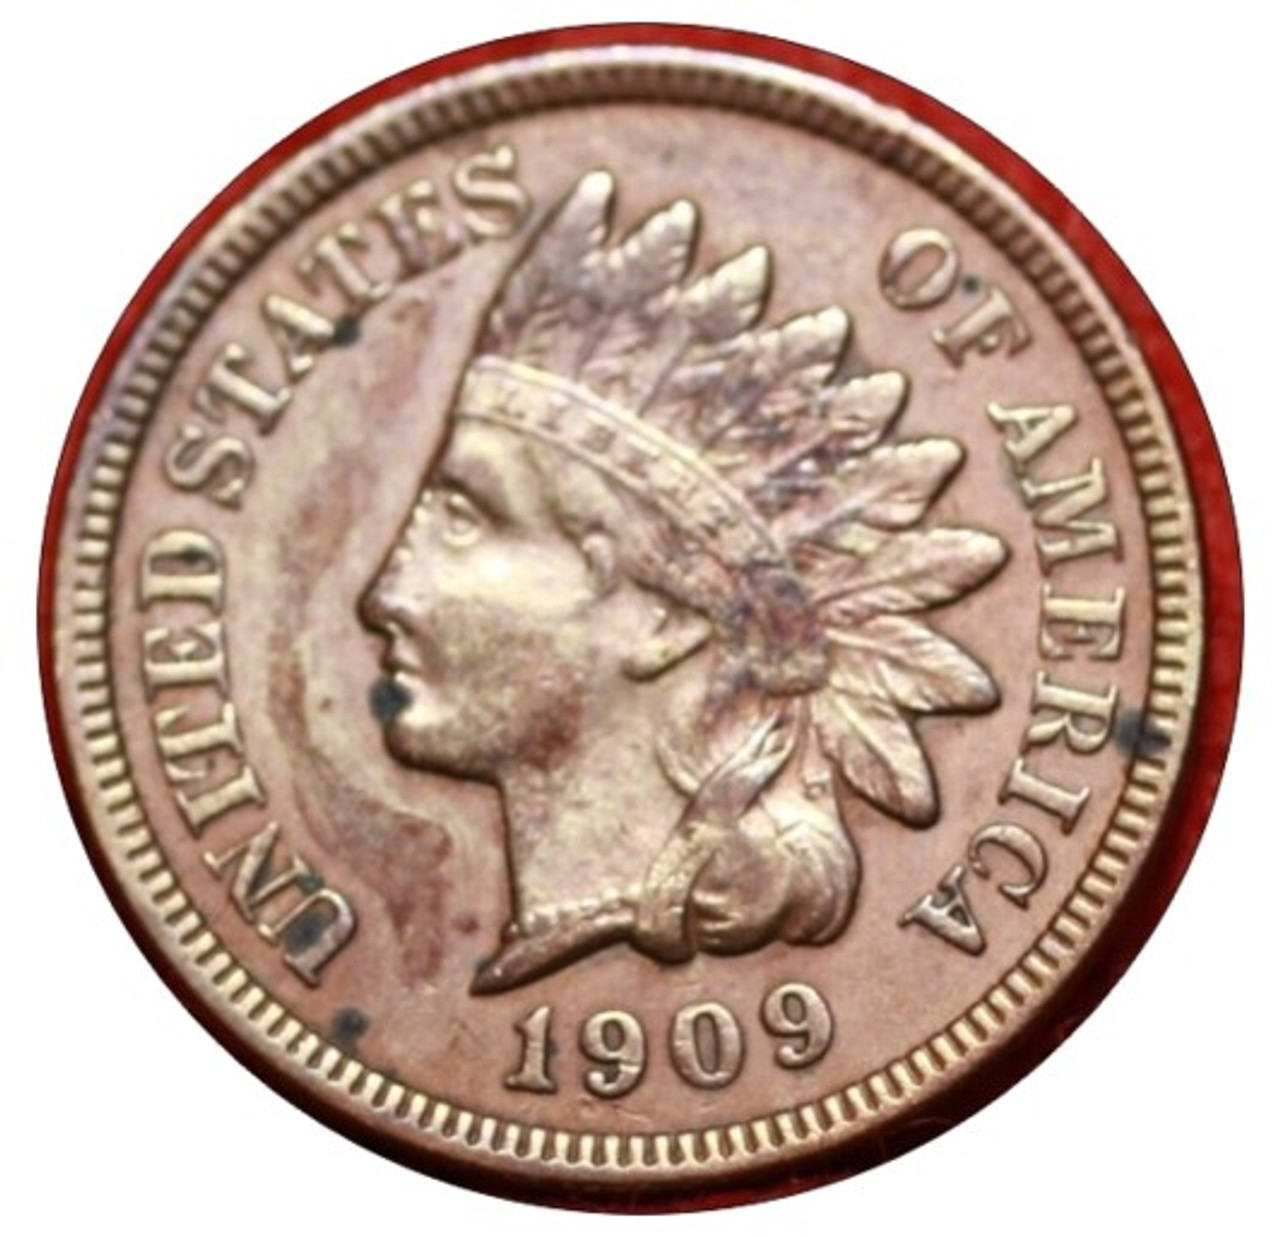 Set of 4 Coaters 1909 Indian Head Penny